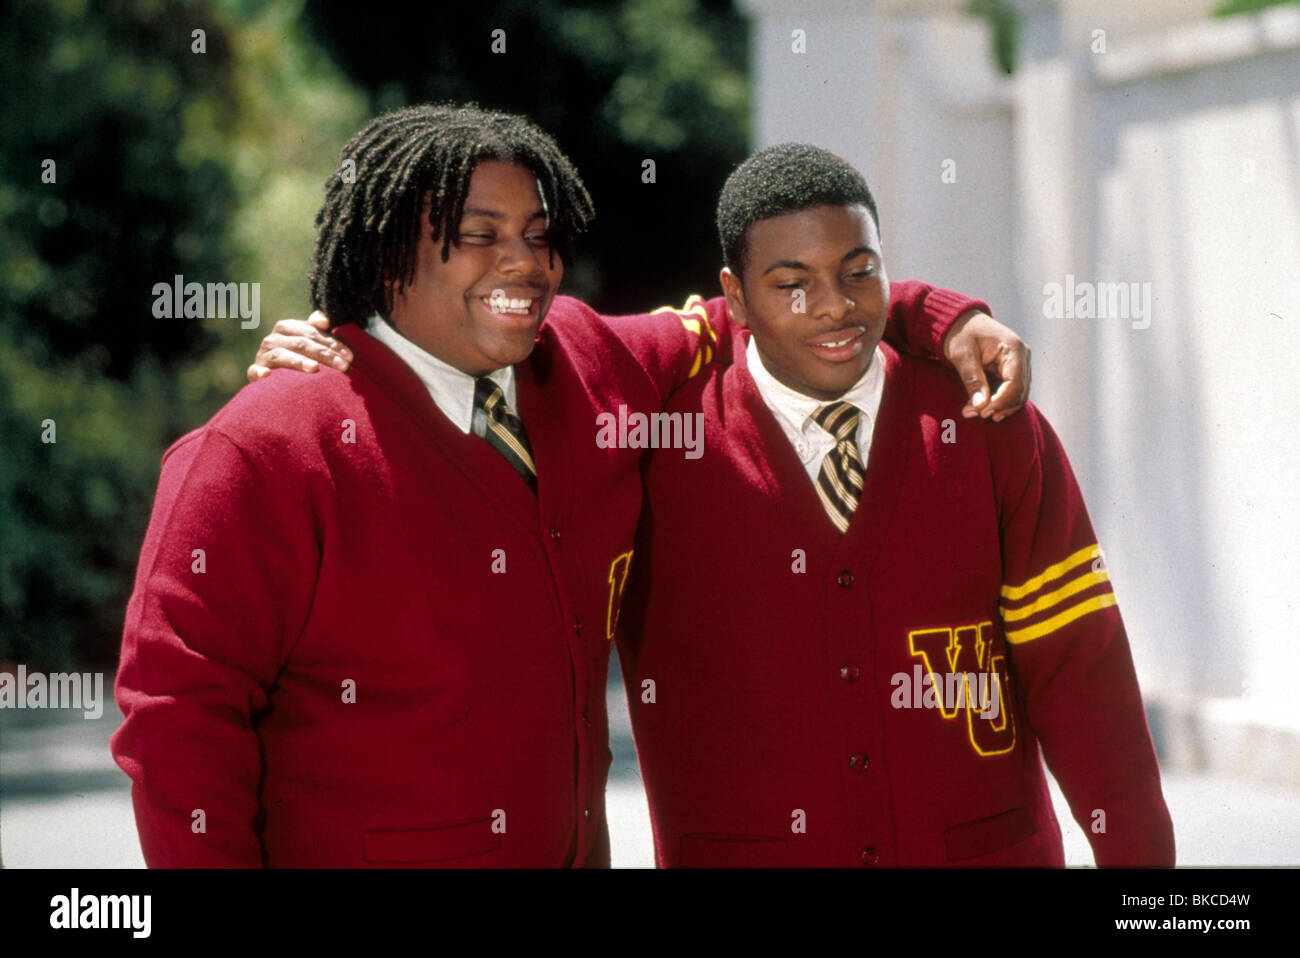 THE ADVENTURES OF ROCKY AND BULLWINKLE (2000) KENAN THOMPSON, KEL MITCHELL ADRO 045 Stock Photo